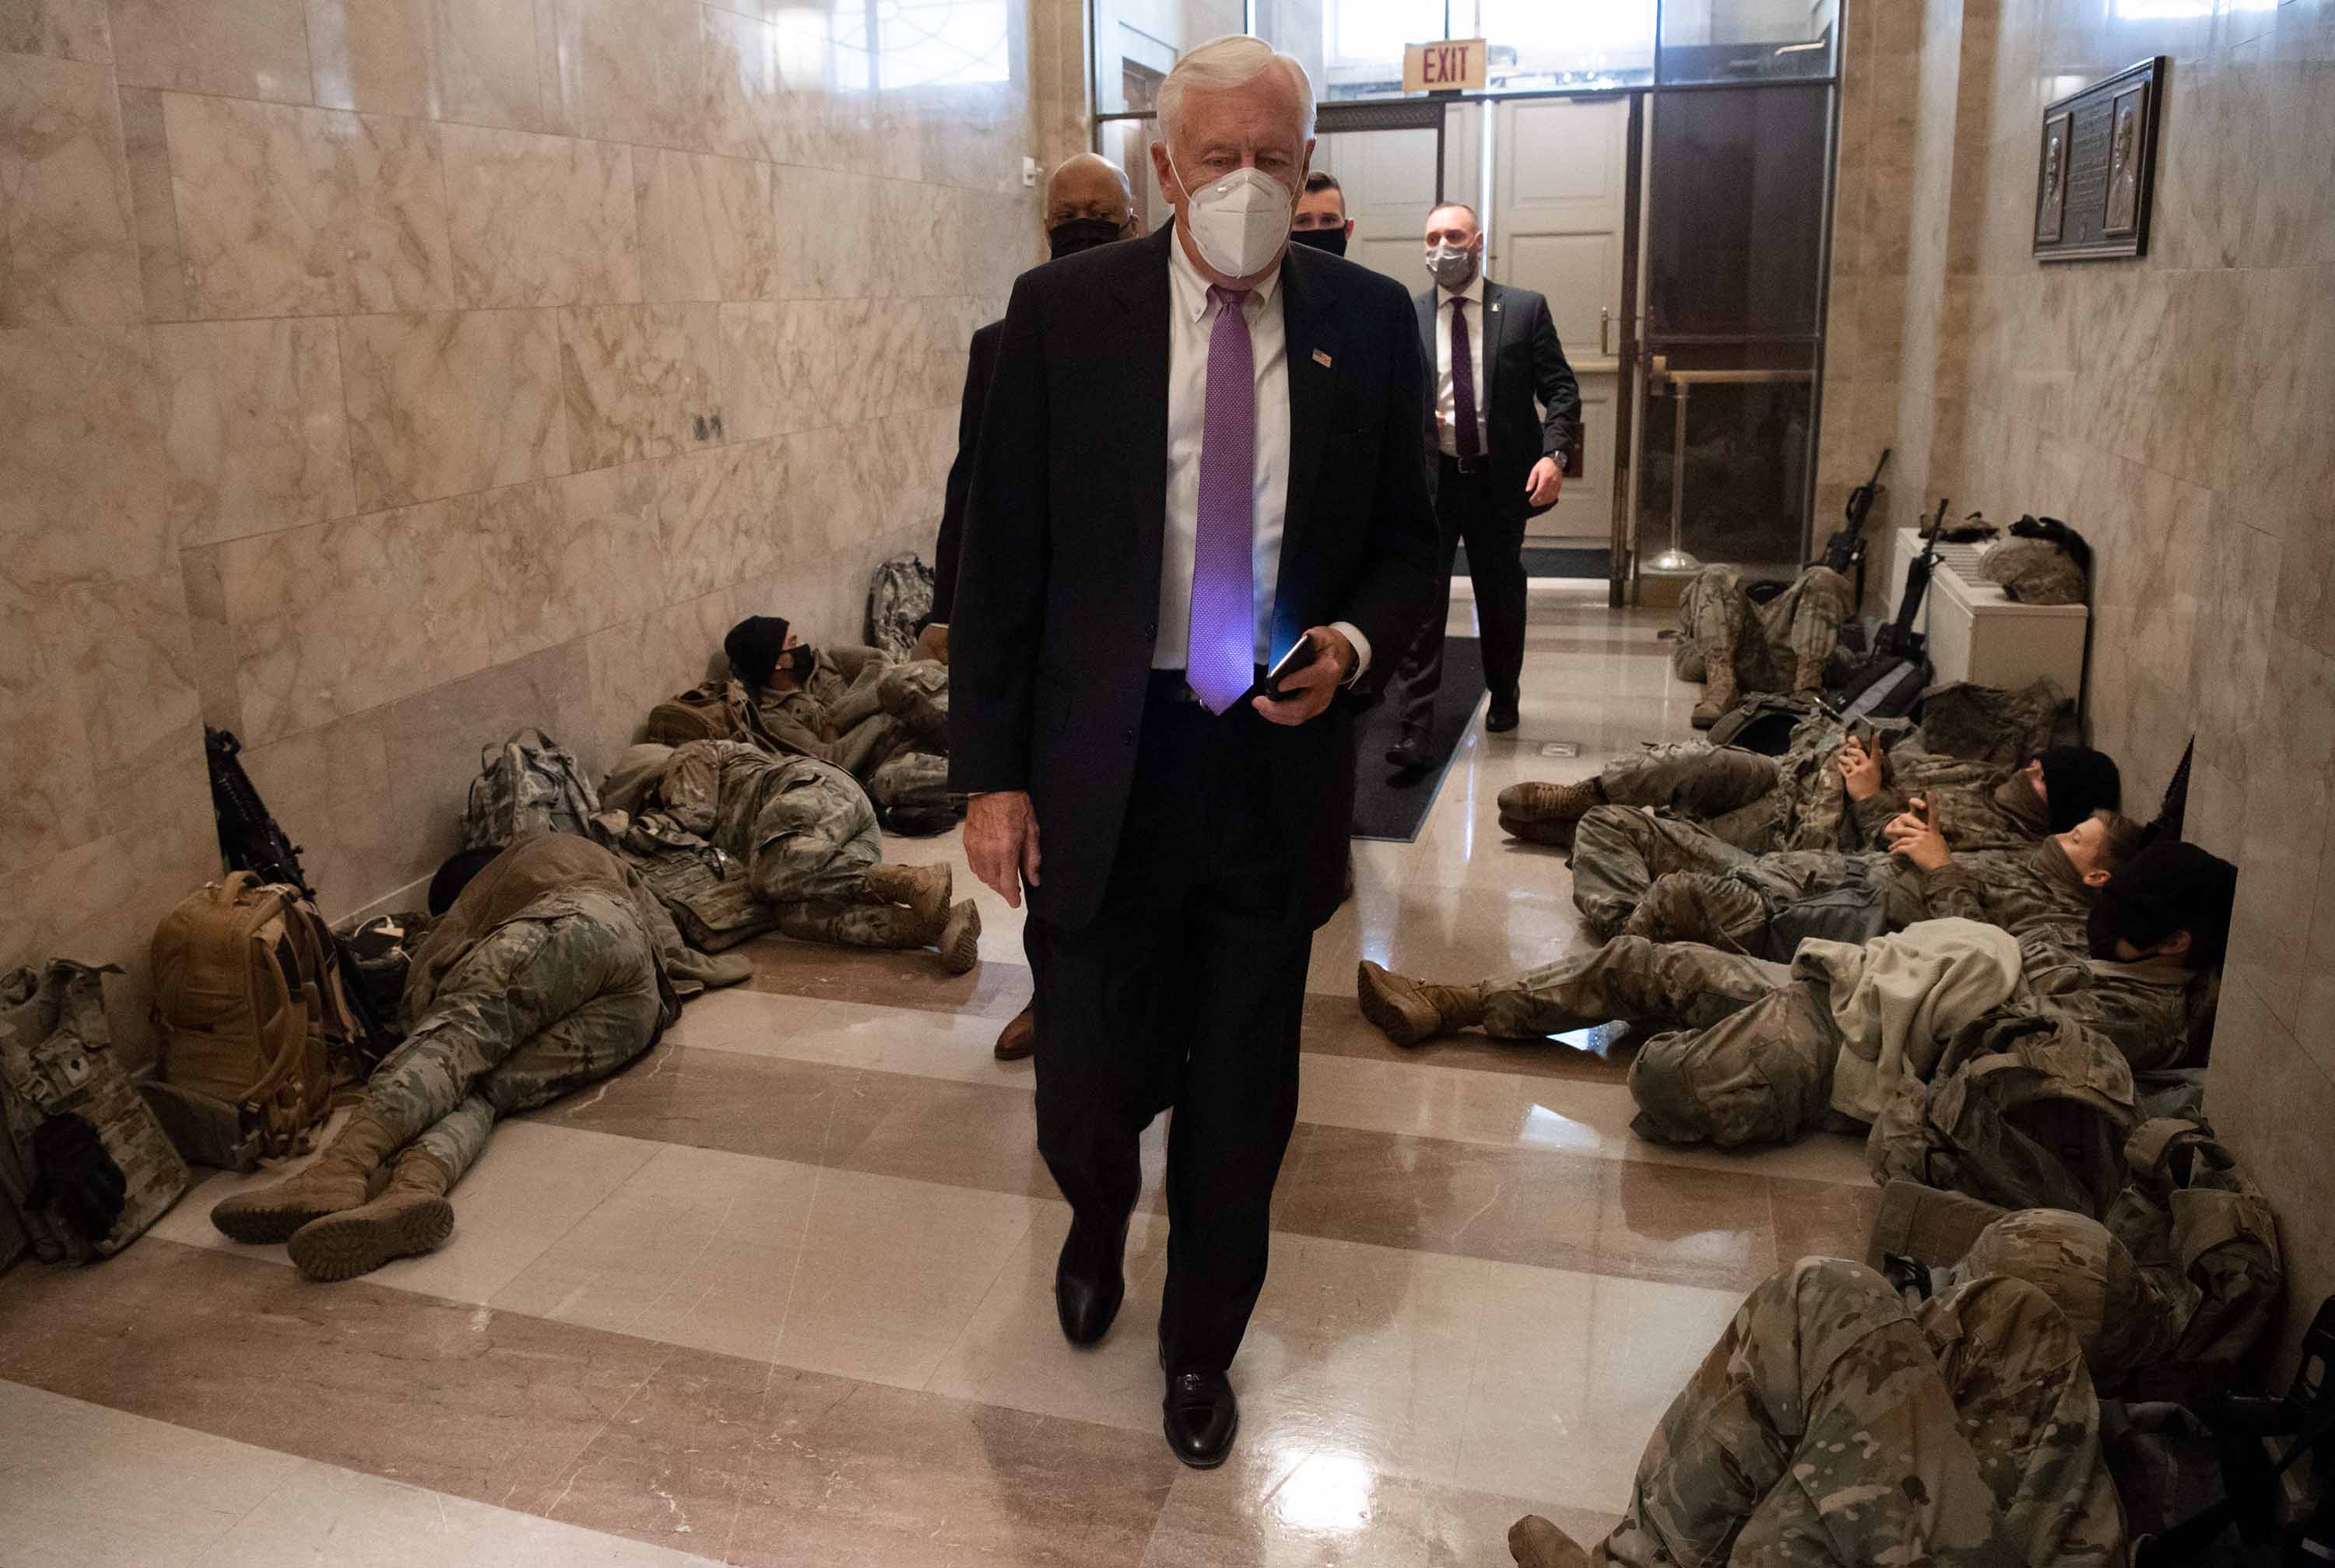 House Majority Leader Steny Hoyer walks past members of the National Guard as he arrives at the US Capitol in Washington, DC, on January 13. 